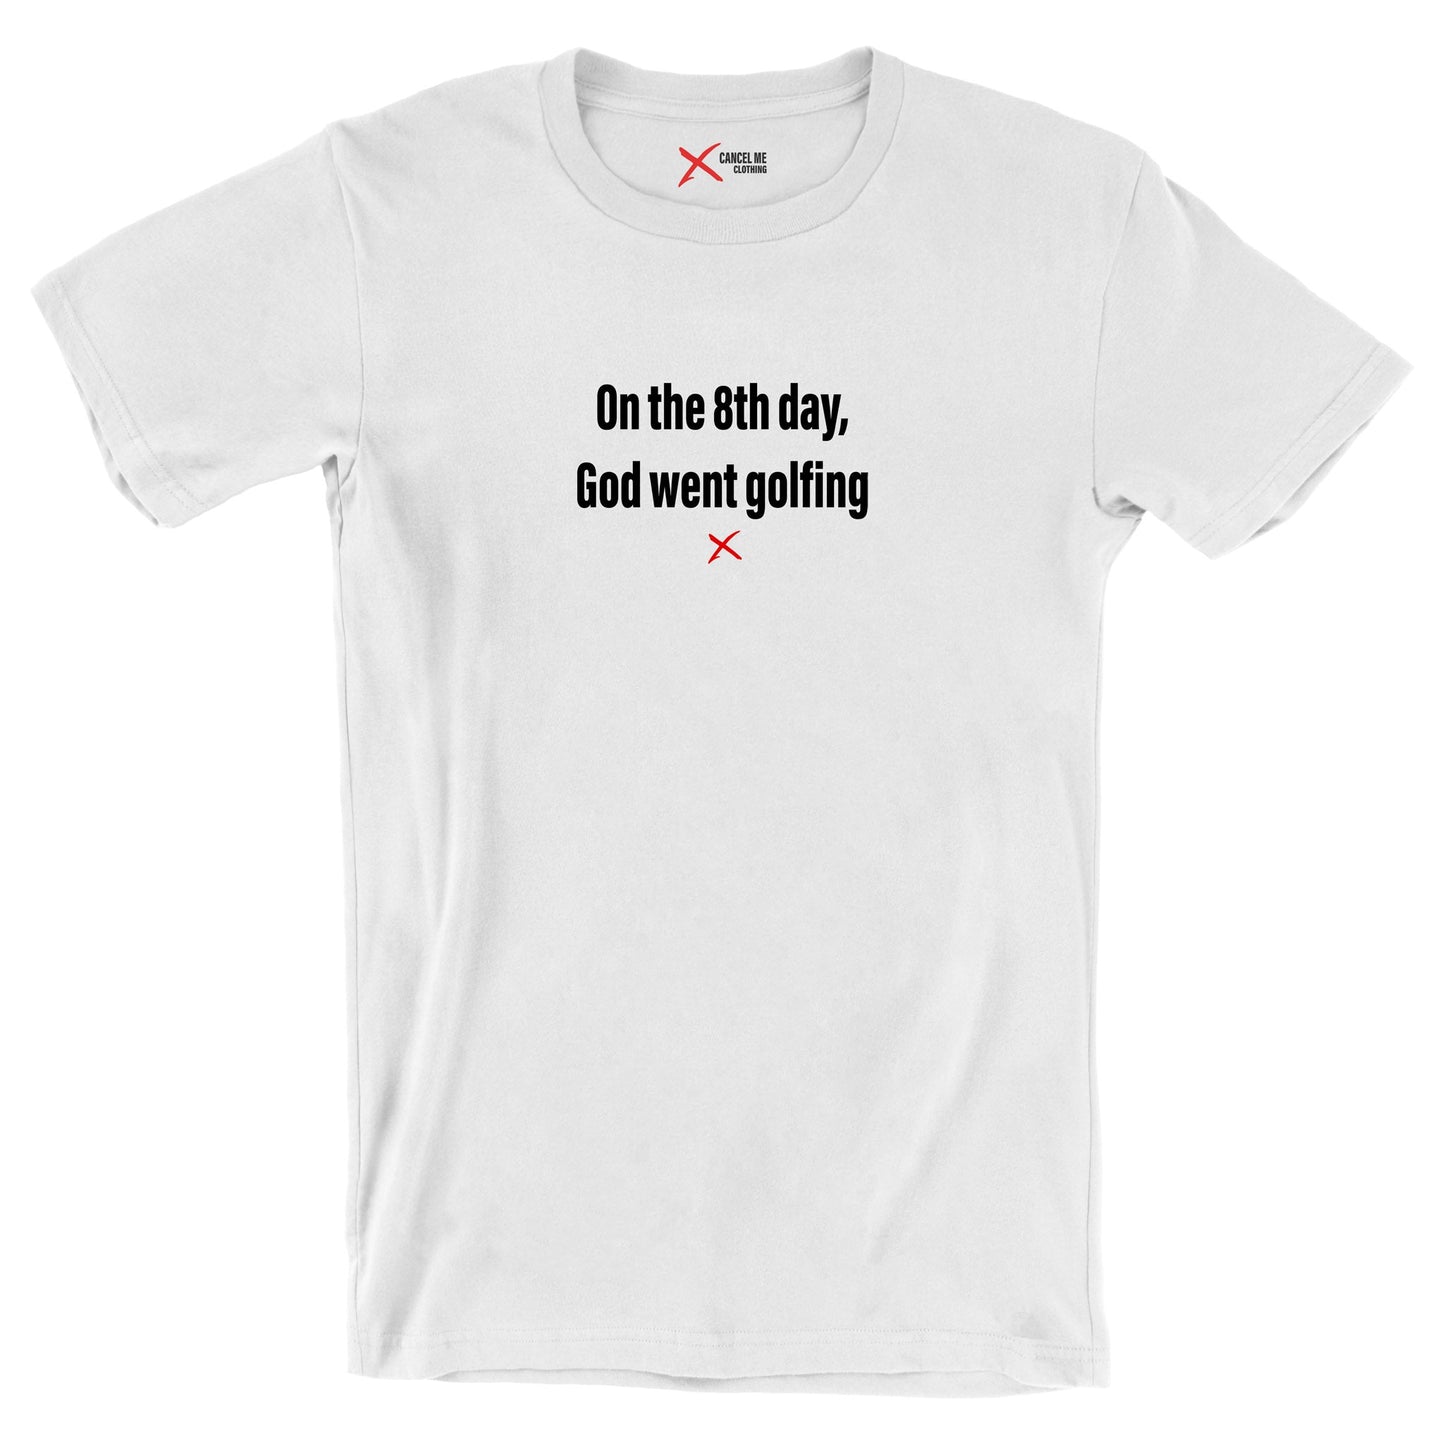 On the 8th day, God went golfing - Shirt